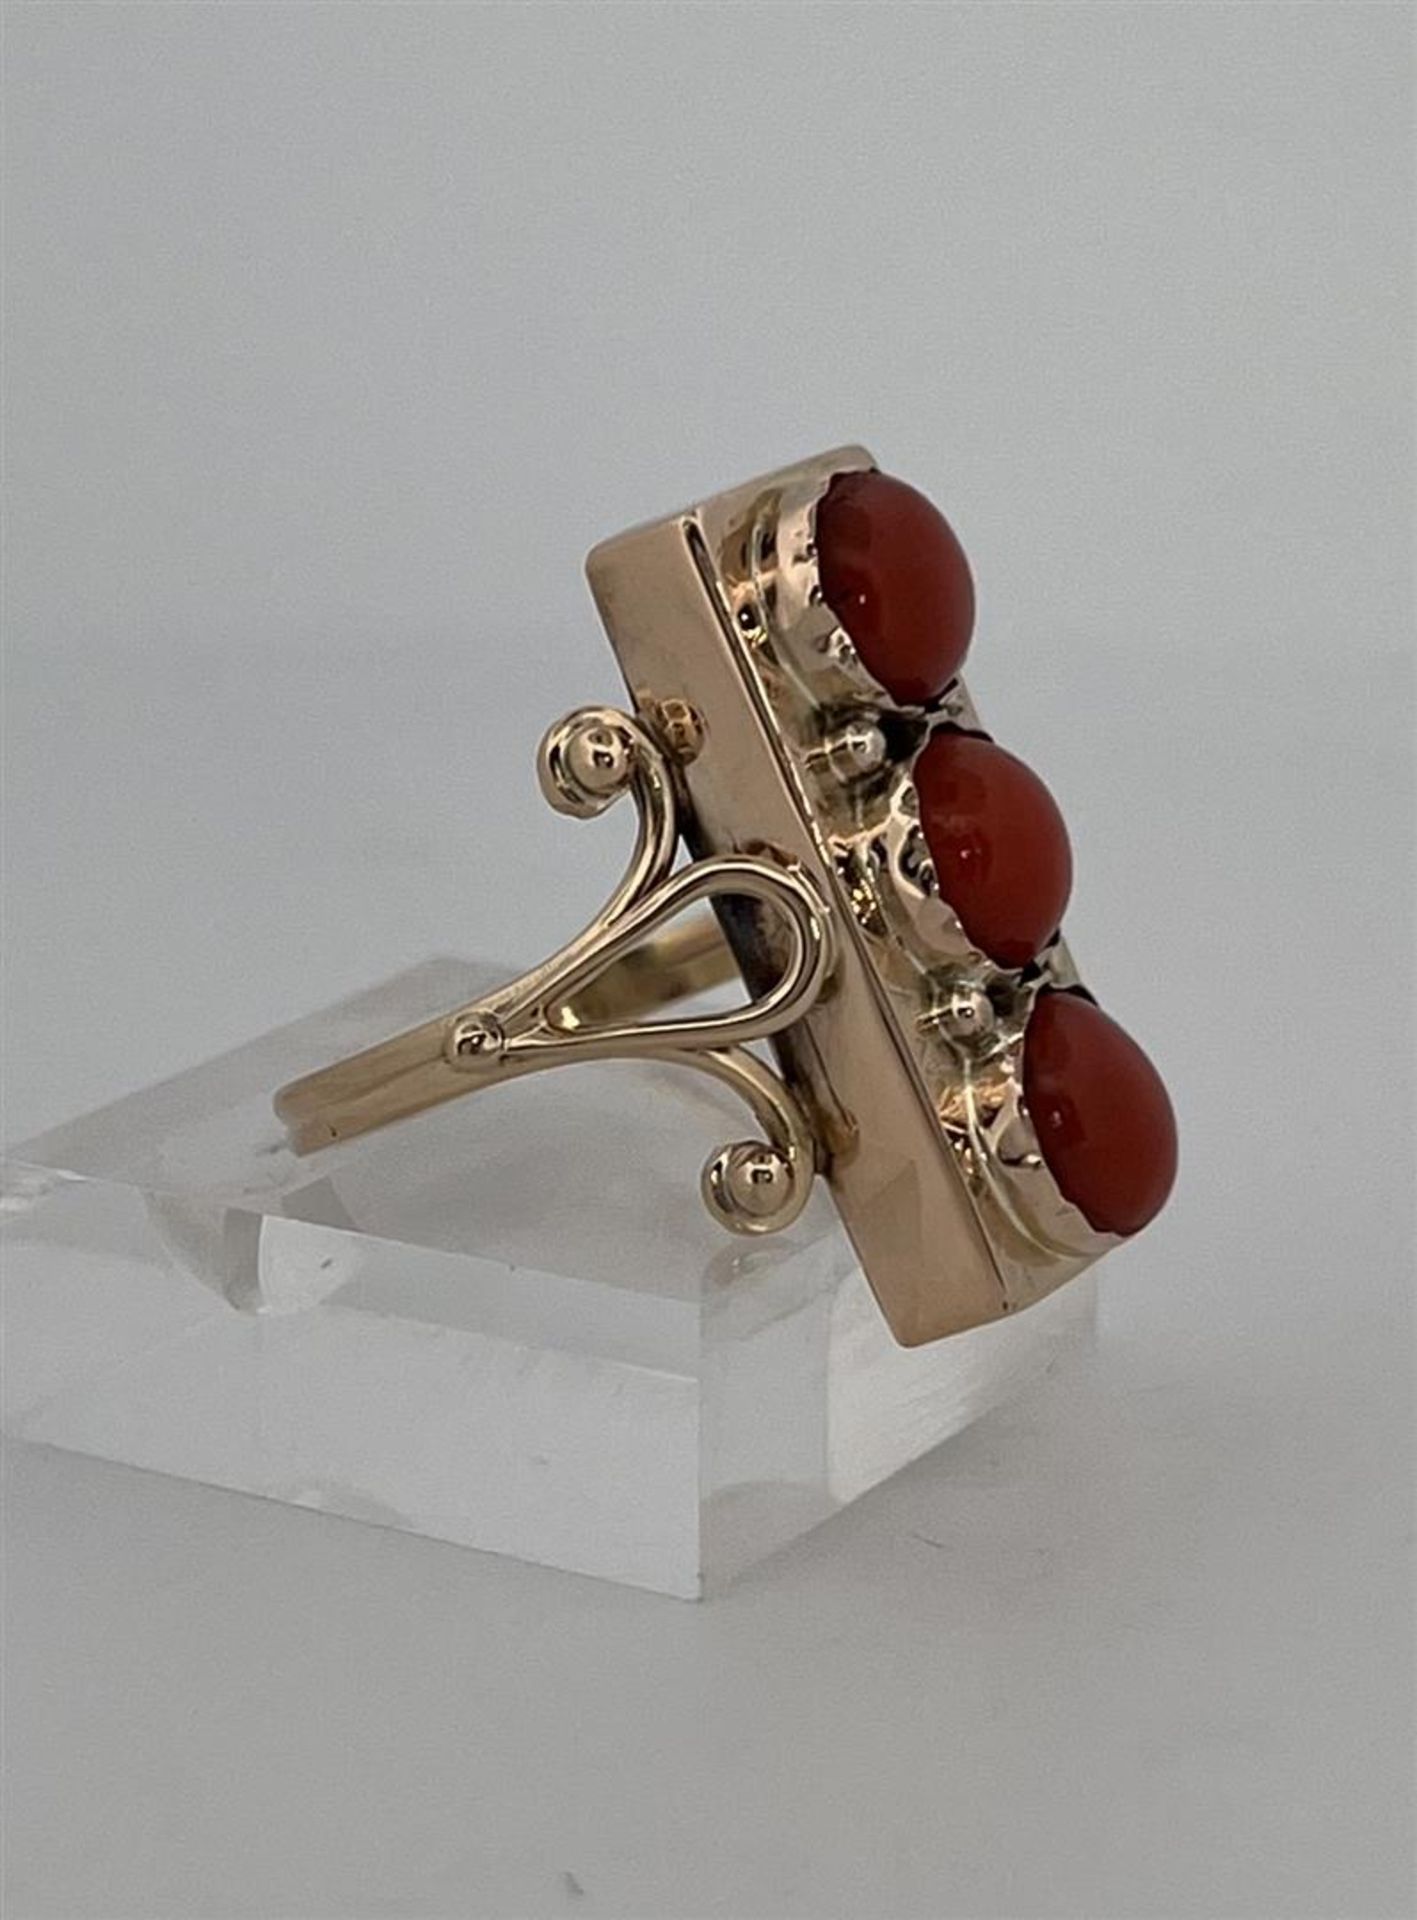 14kt yellow gold 3-stone ring set with red coral.
The ring is set with 3 round cabochon cut red cora - Image 2 of 7